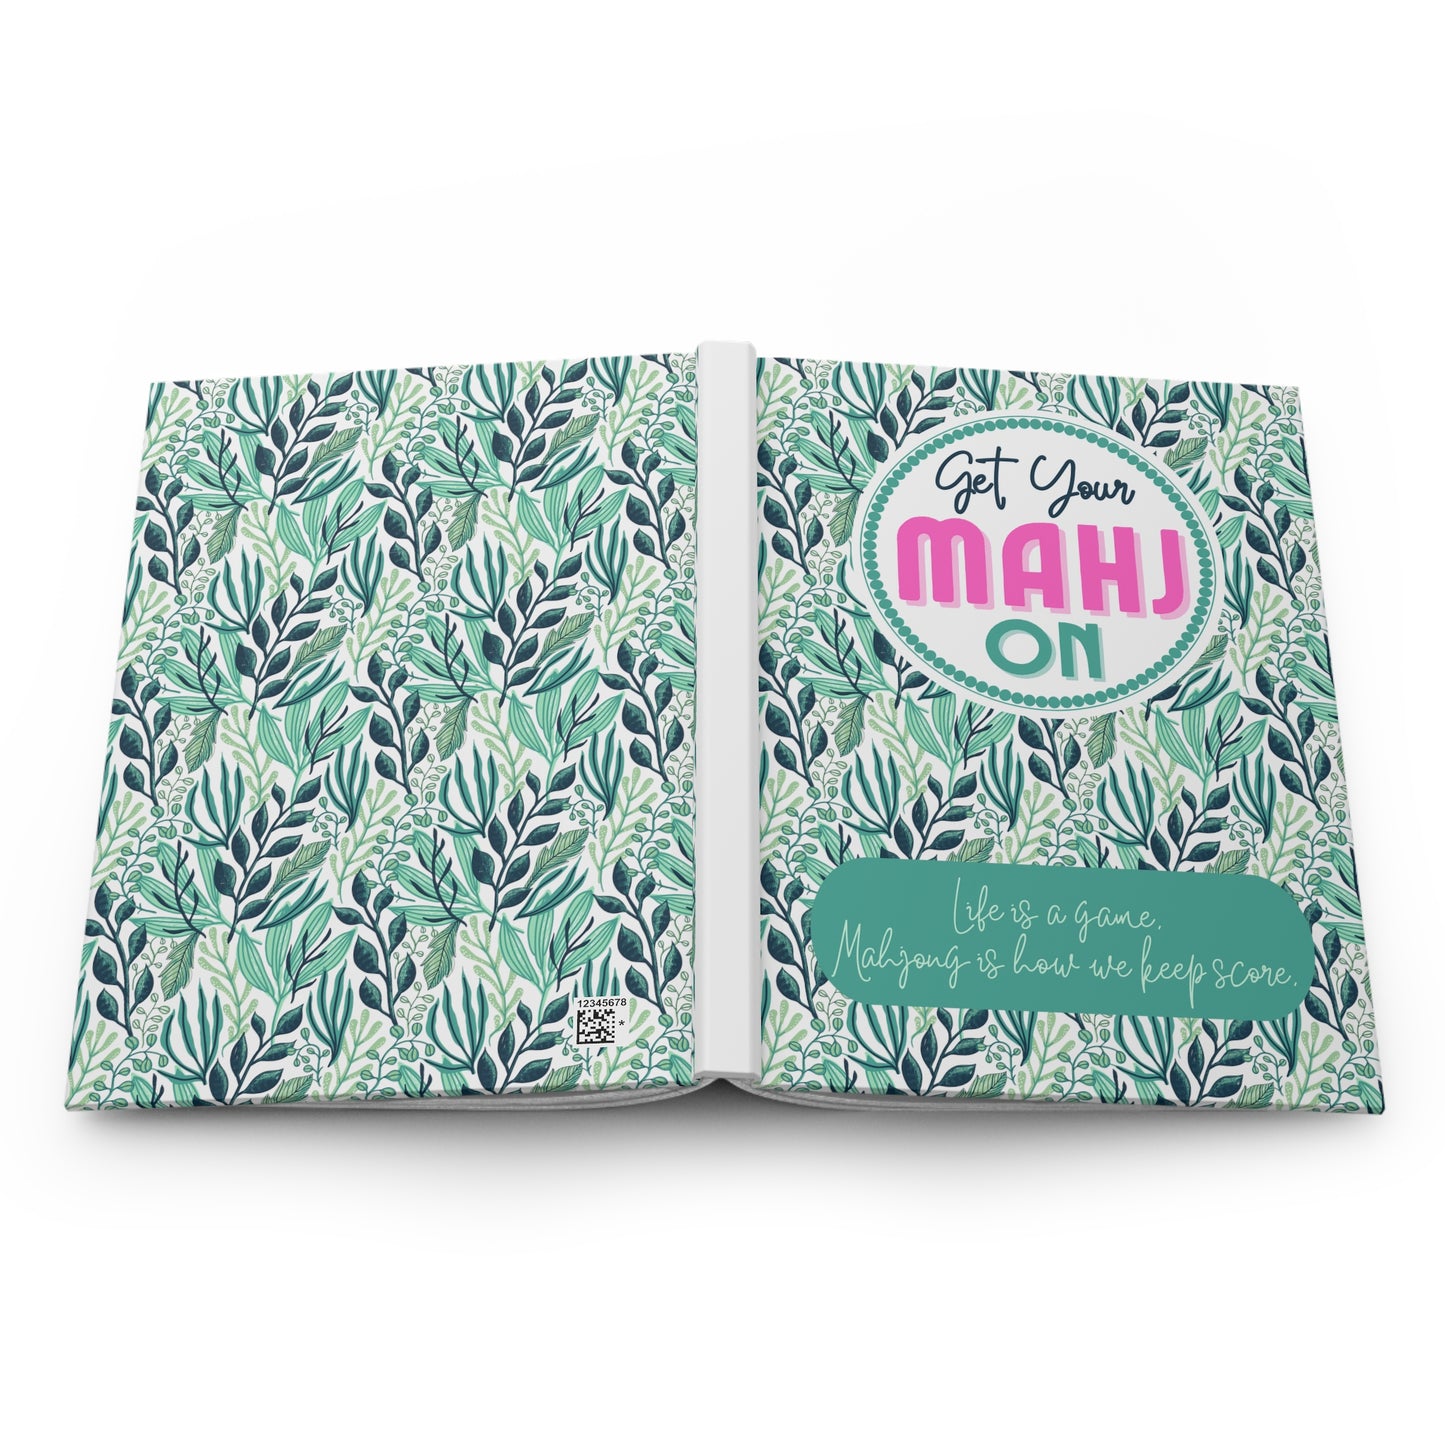 Mahjong Score Notebook, Green- Mah-jongg journal to note memories and scores through time. Great gift!